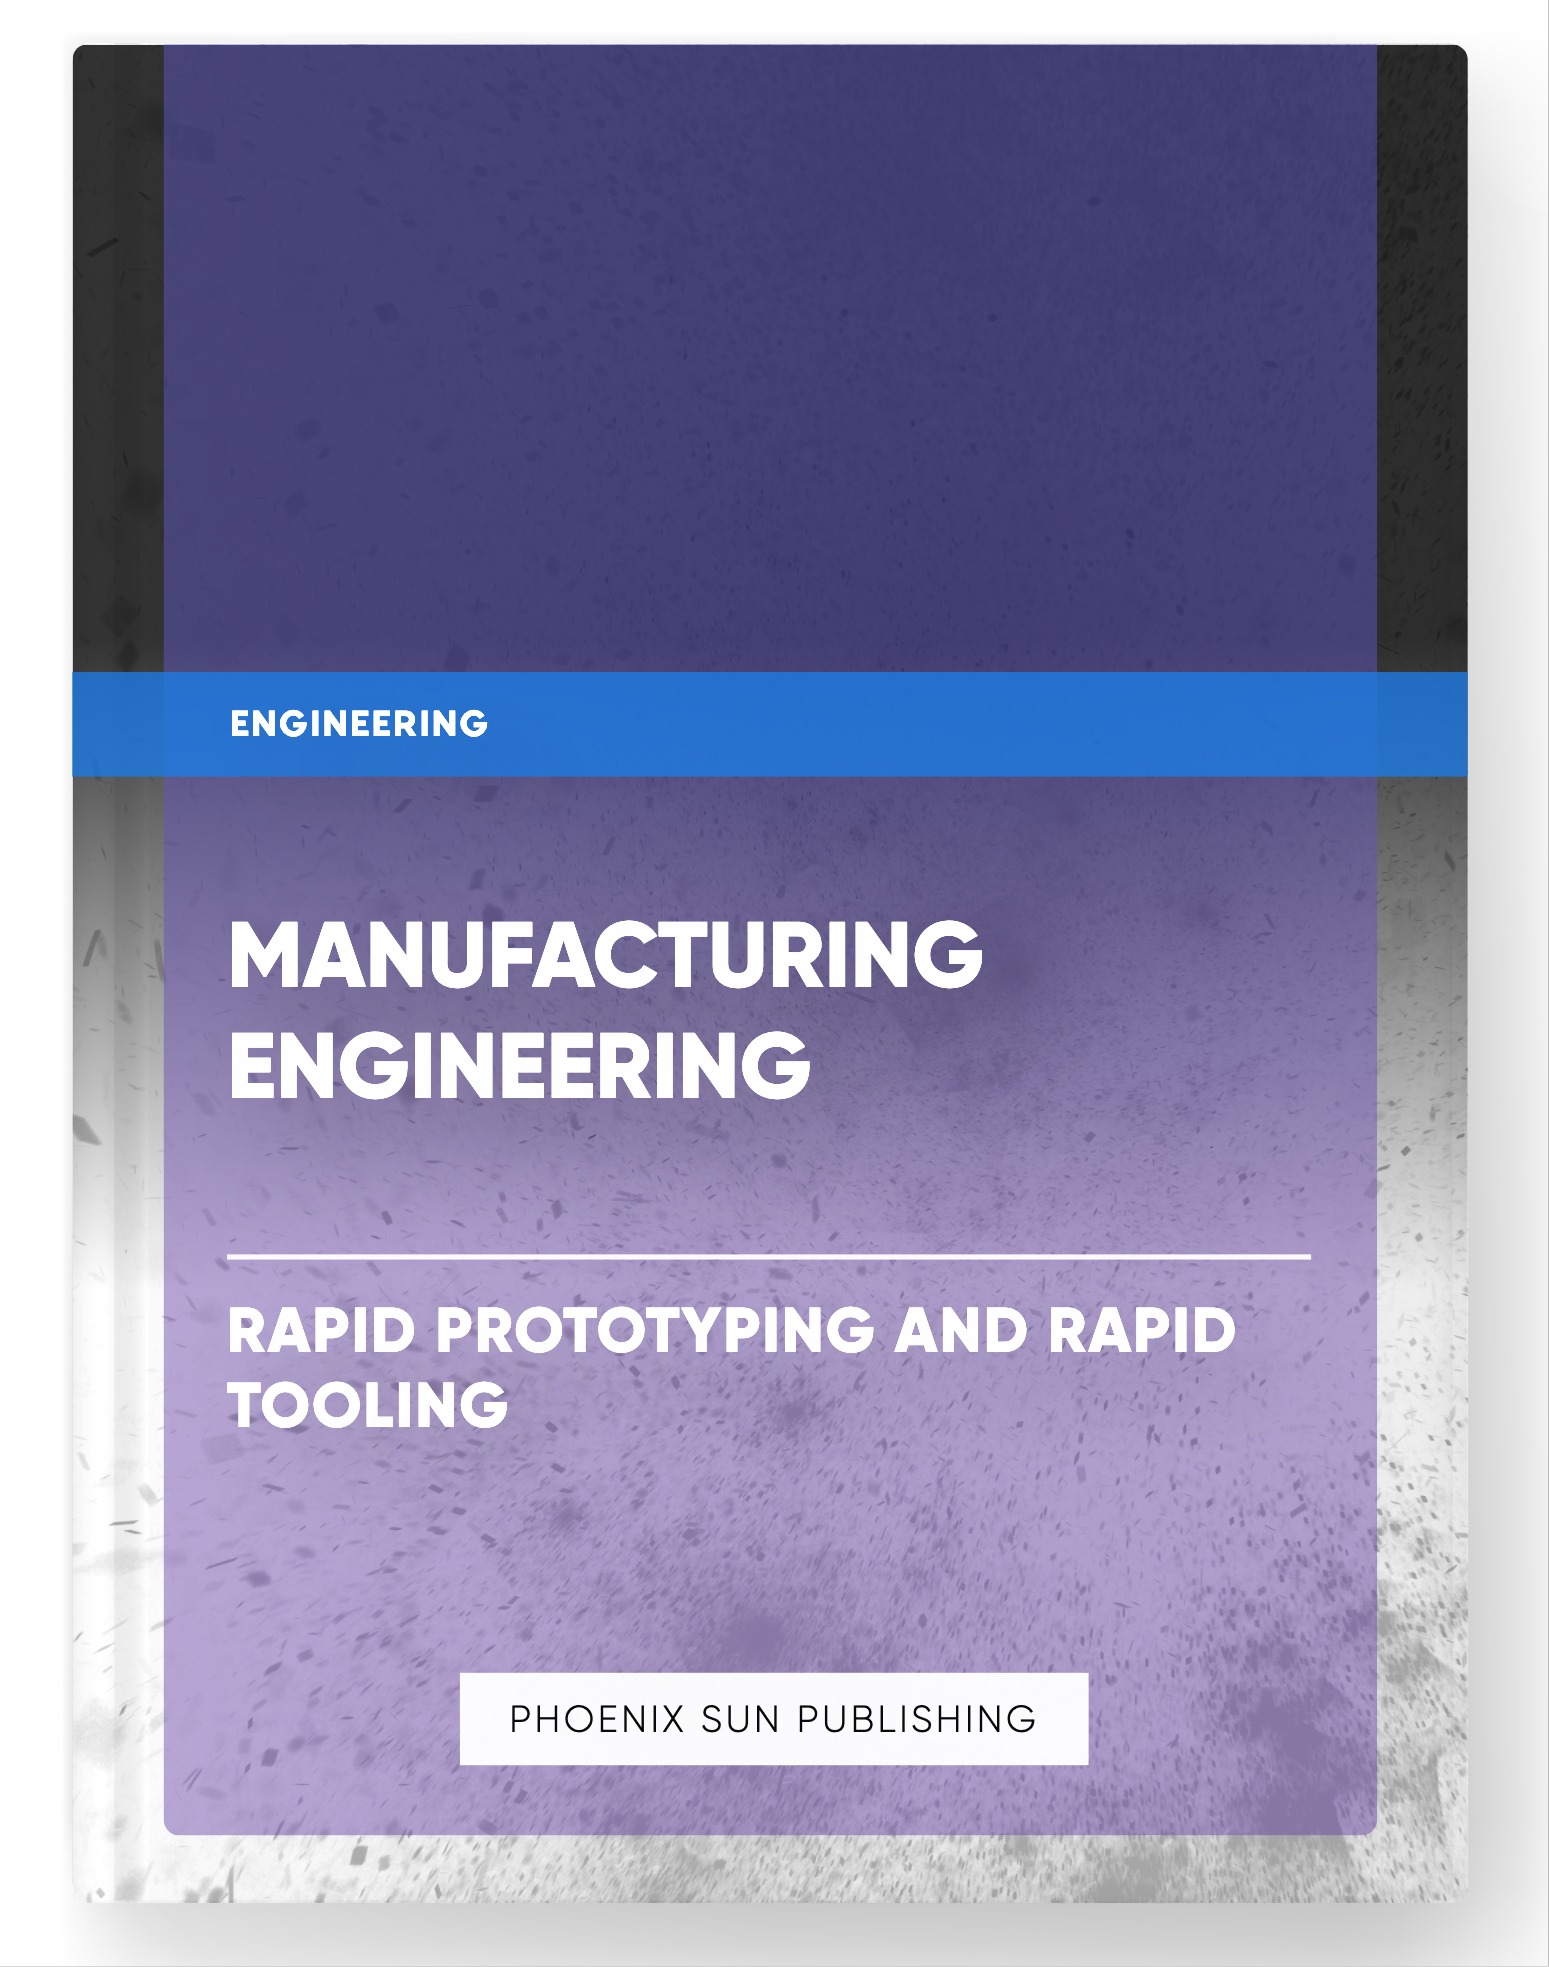 Manufacturing Engineering – Rapid Prototyping and Rapid Tooling